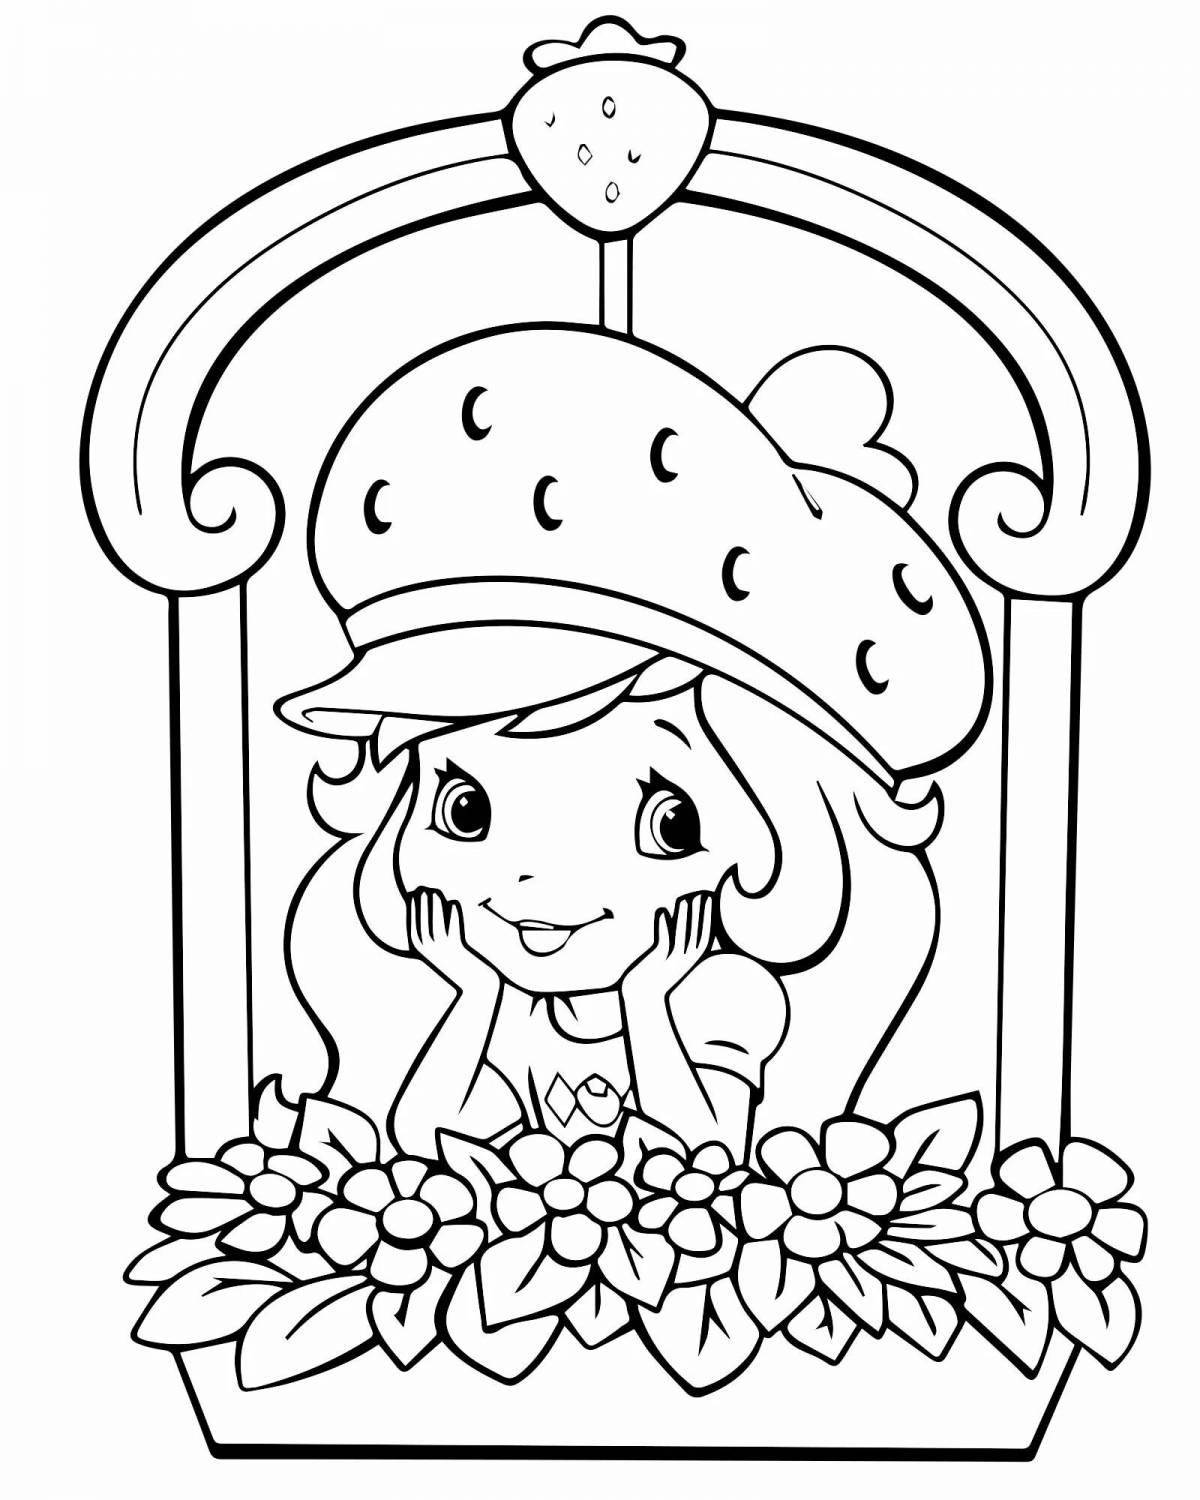 Playful charlotte strawberry coloring pages for girls